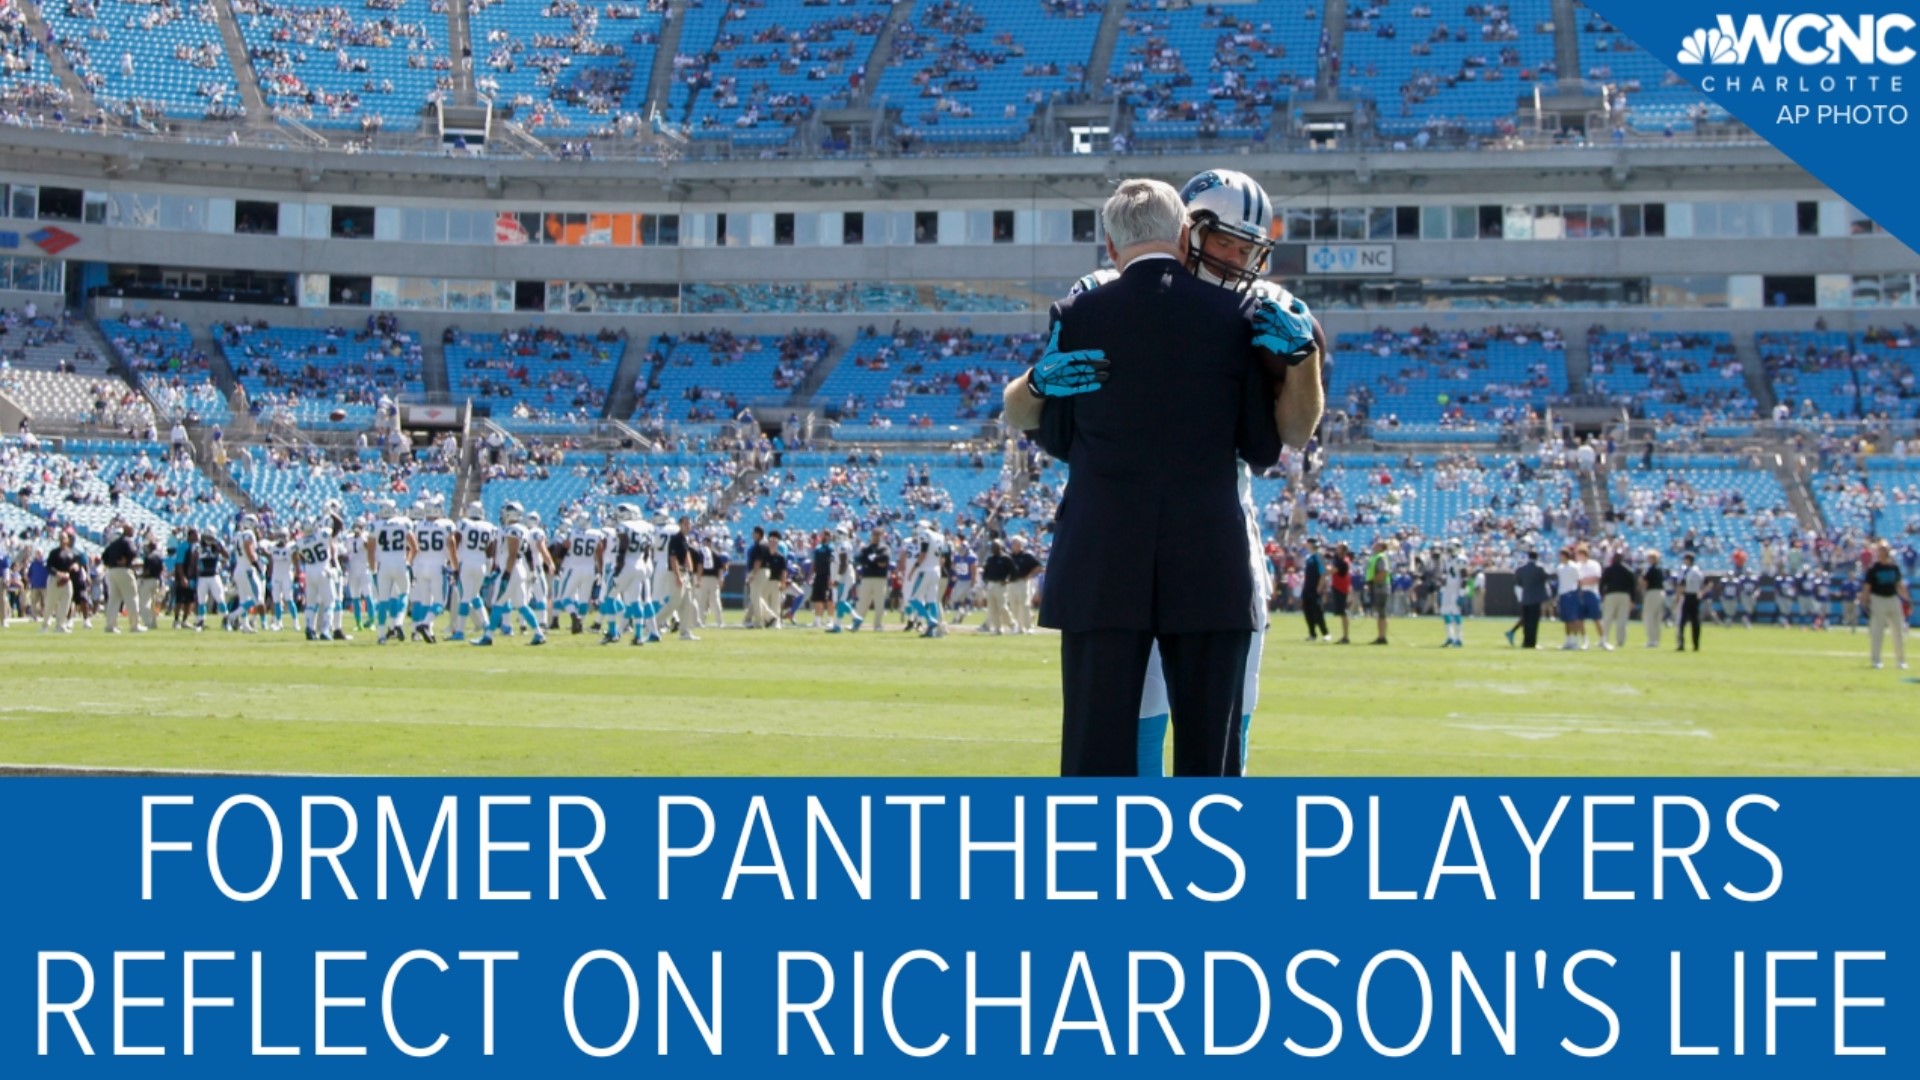 Richardson leaves behind a complicated legacy and many former players remember the way he shaped their lives.